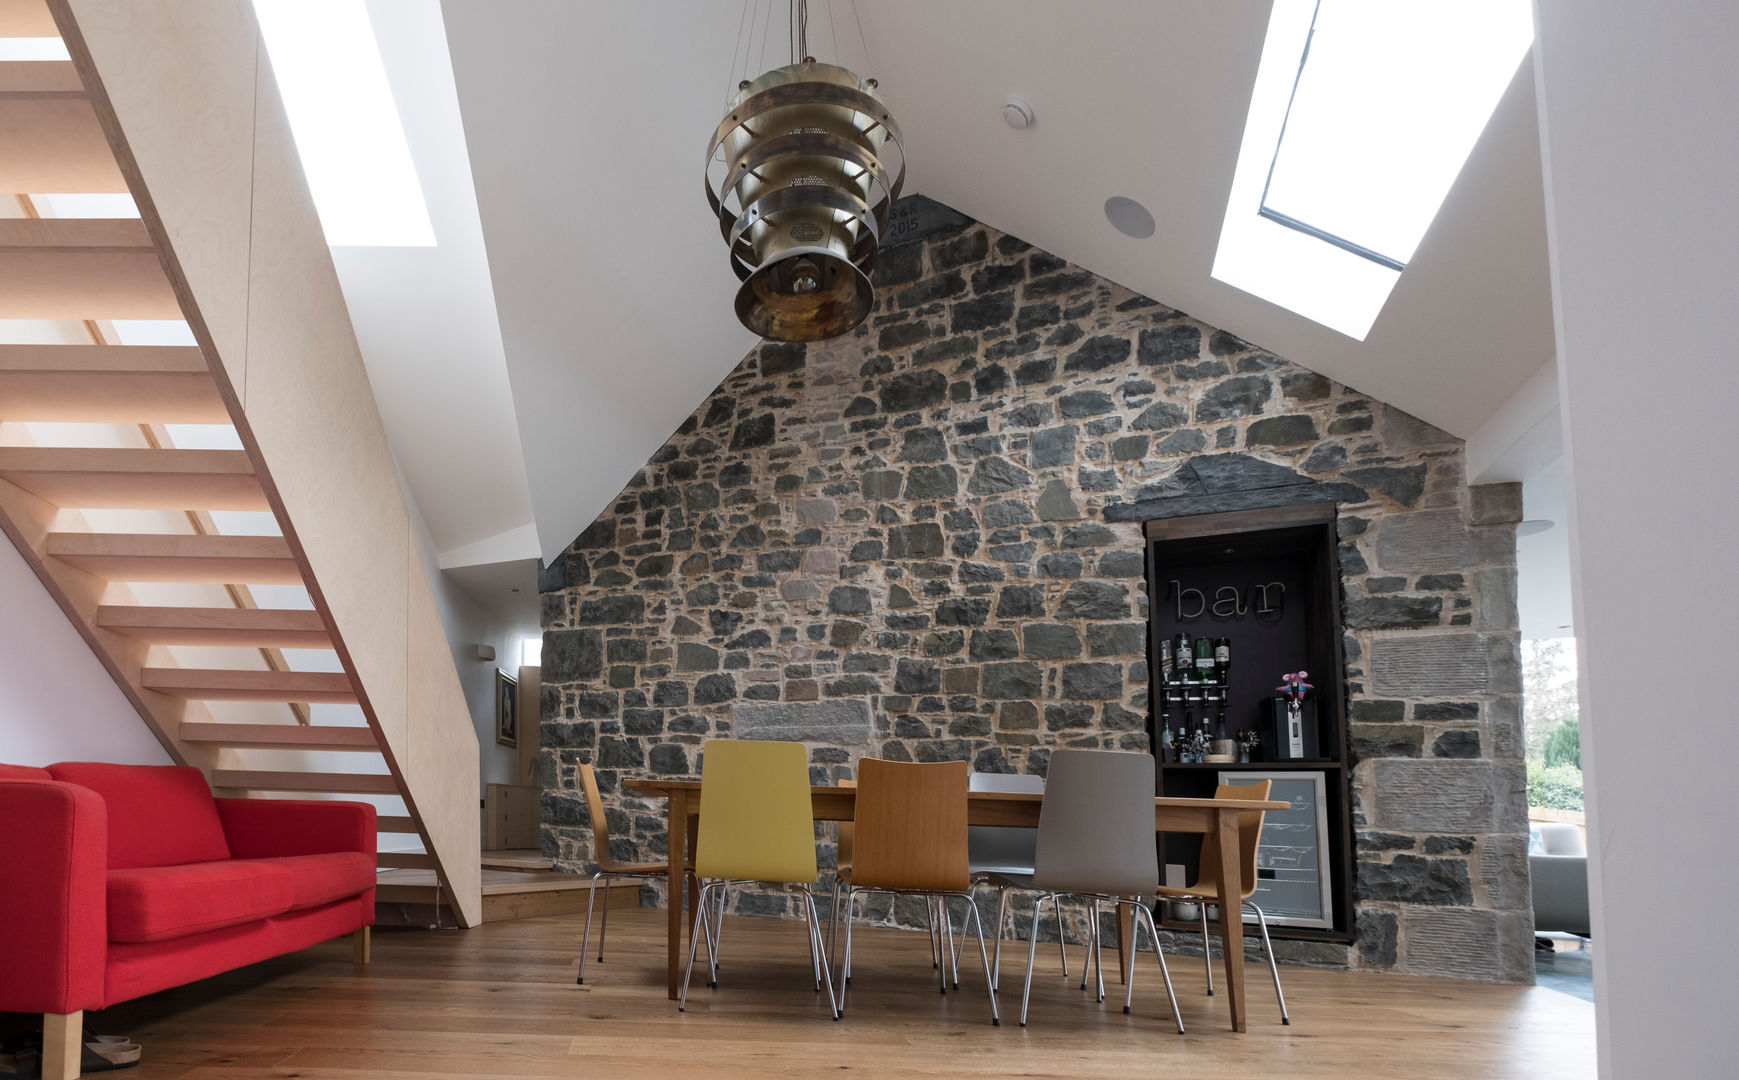 Dining room with exposed stone wall Woodside Parker Kirk Architects Salle à manger moderne Stone,Dining table,Bespoke,Bespoke Staircase,Plywood,Red sofa,Bar,Beer fridge,Rooflight,Daylight,Pendant light,Reclaimed